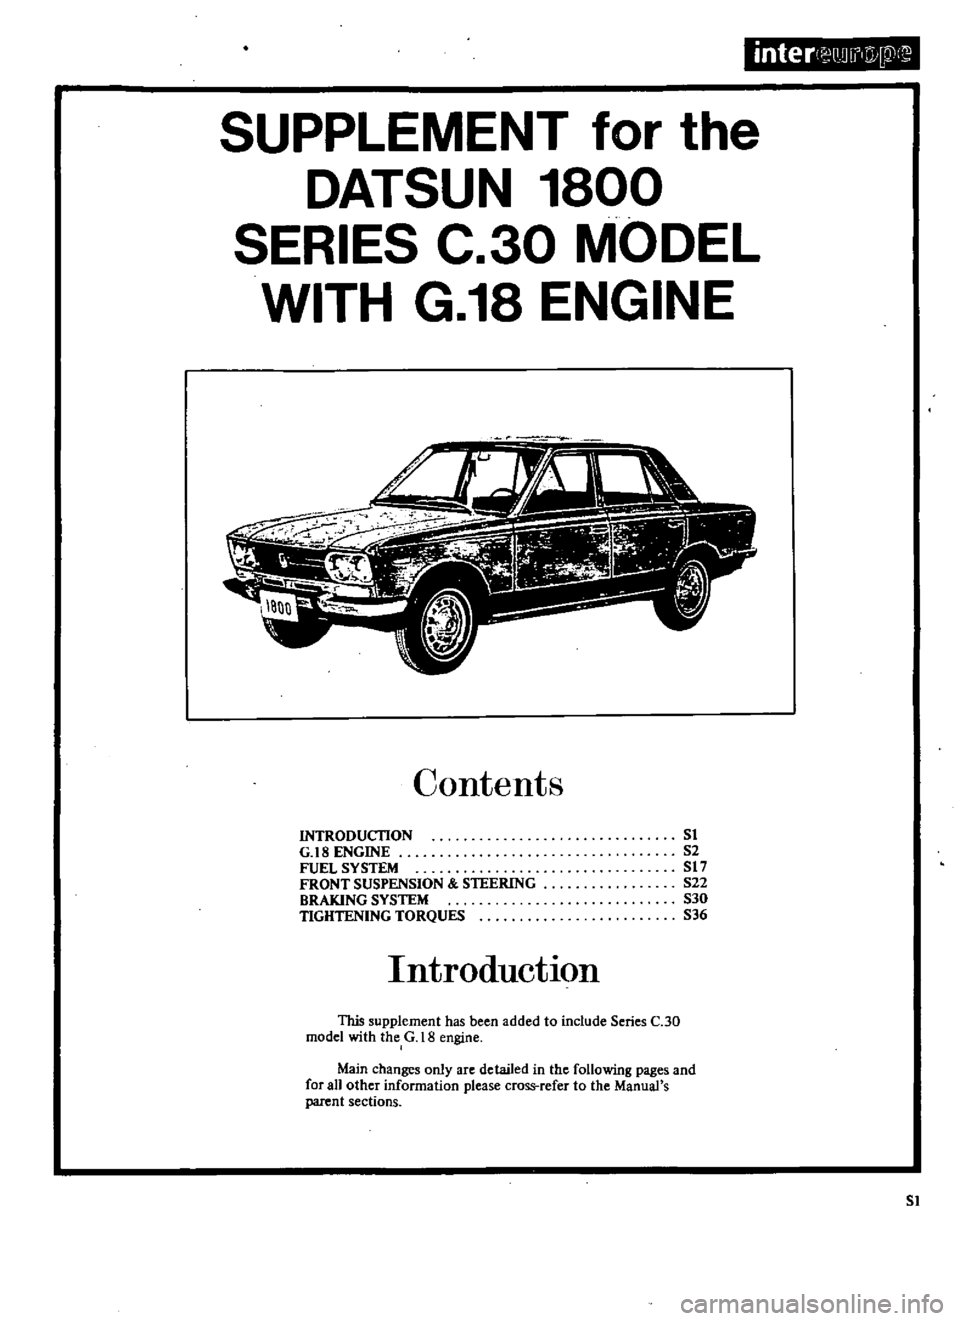 DATSUN 510 1969  Service Repair Manual 
inter 
QDu

w
P1

SUPPLEMENT 
for 
the

DATSUN 
1800

SERIES 
C 
30 
MODEL

WITH 
G 
18 
ENGINE

Contents

INTRODUCTION

G 
18 
ENGINE

FUEL 
SYSTEM

FRONT 
SUSPENSION 
STEERING

BRAKING 
SYSTEM

TIG